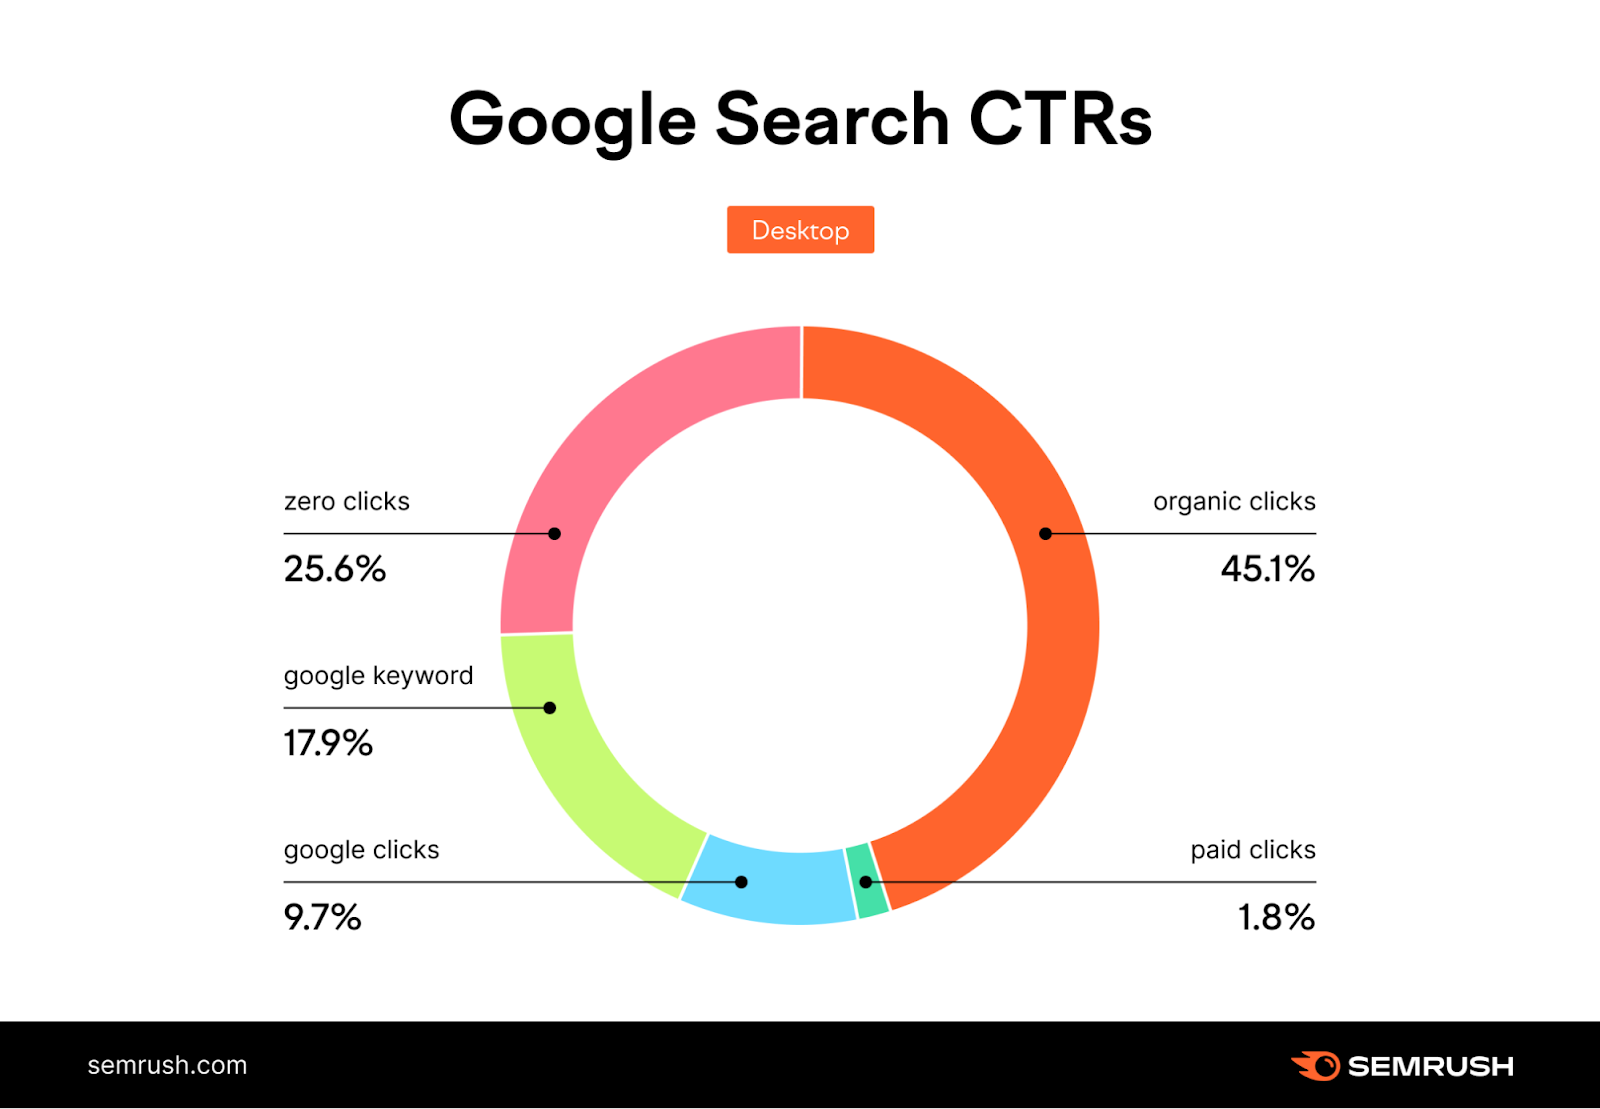 a chart showing Google search CTRs: organic clicks (45.1%), zero clicks (25.6%), google keyword (19.9%), google clicks (9.7%), and paid clicks (1.9%)